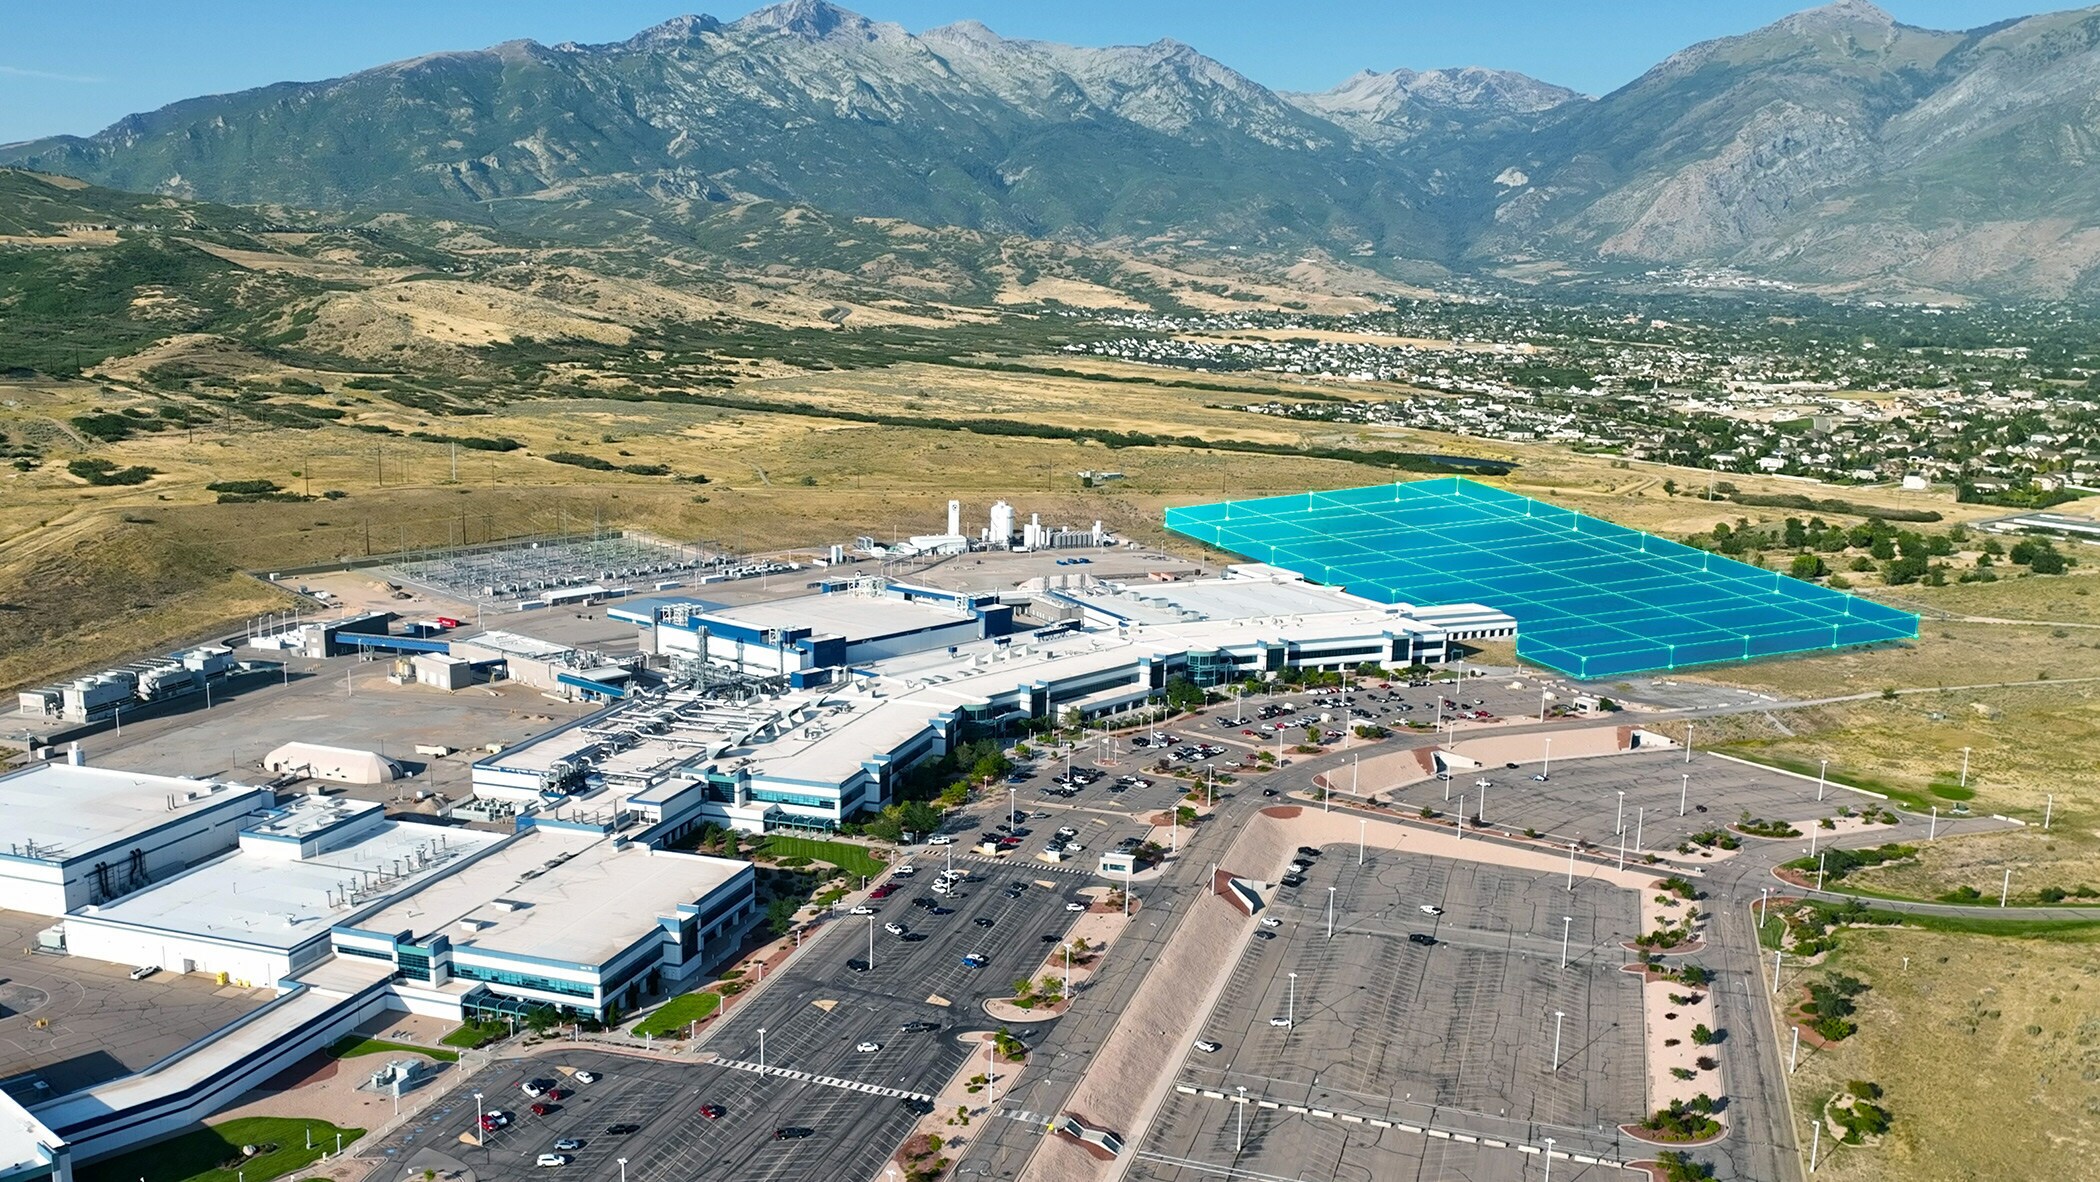 The proposed semiconductor plant expansion by Texas Instruments in Utah is expected to cost $11 billion. (Texas Instruments)